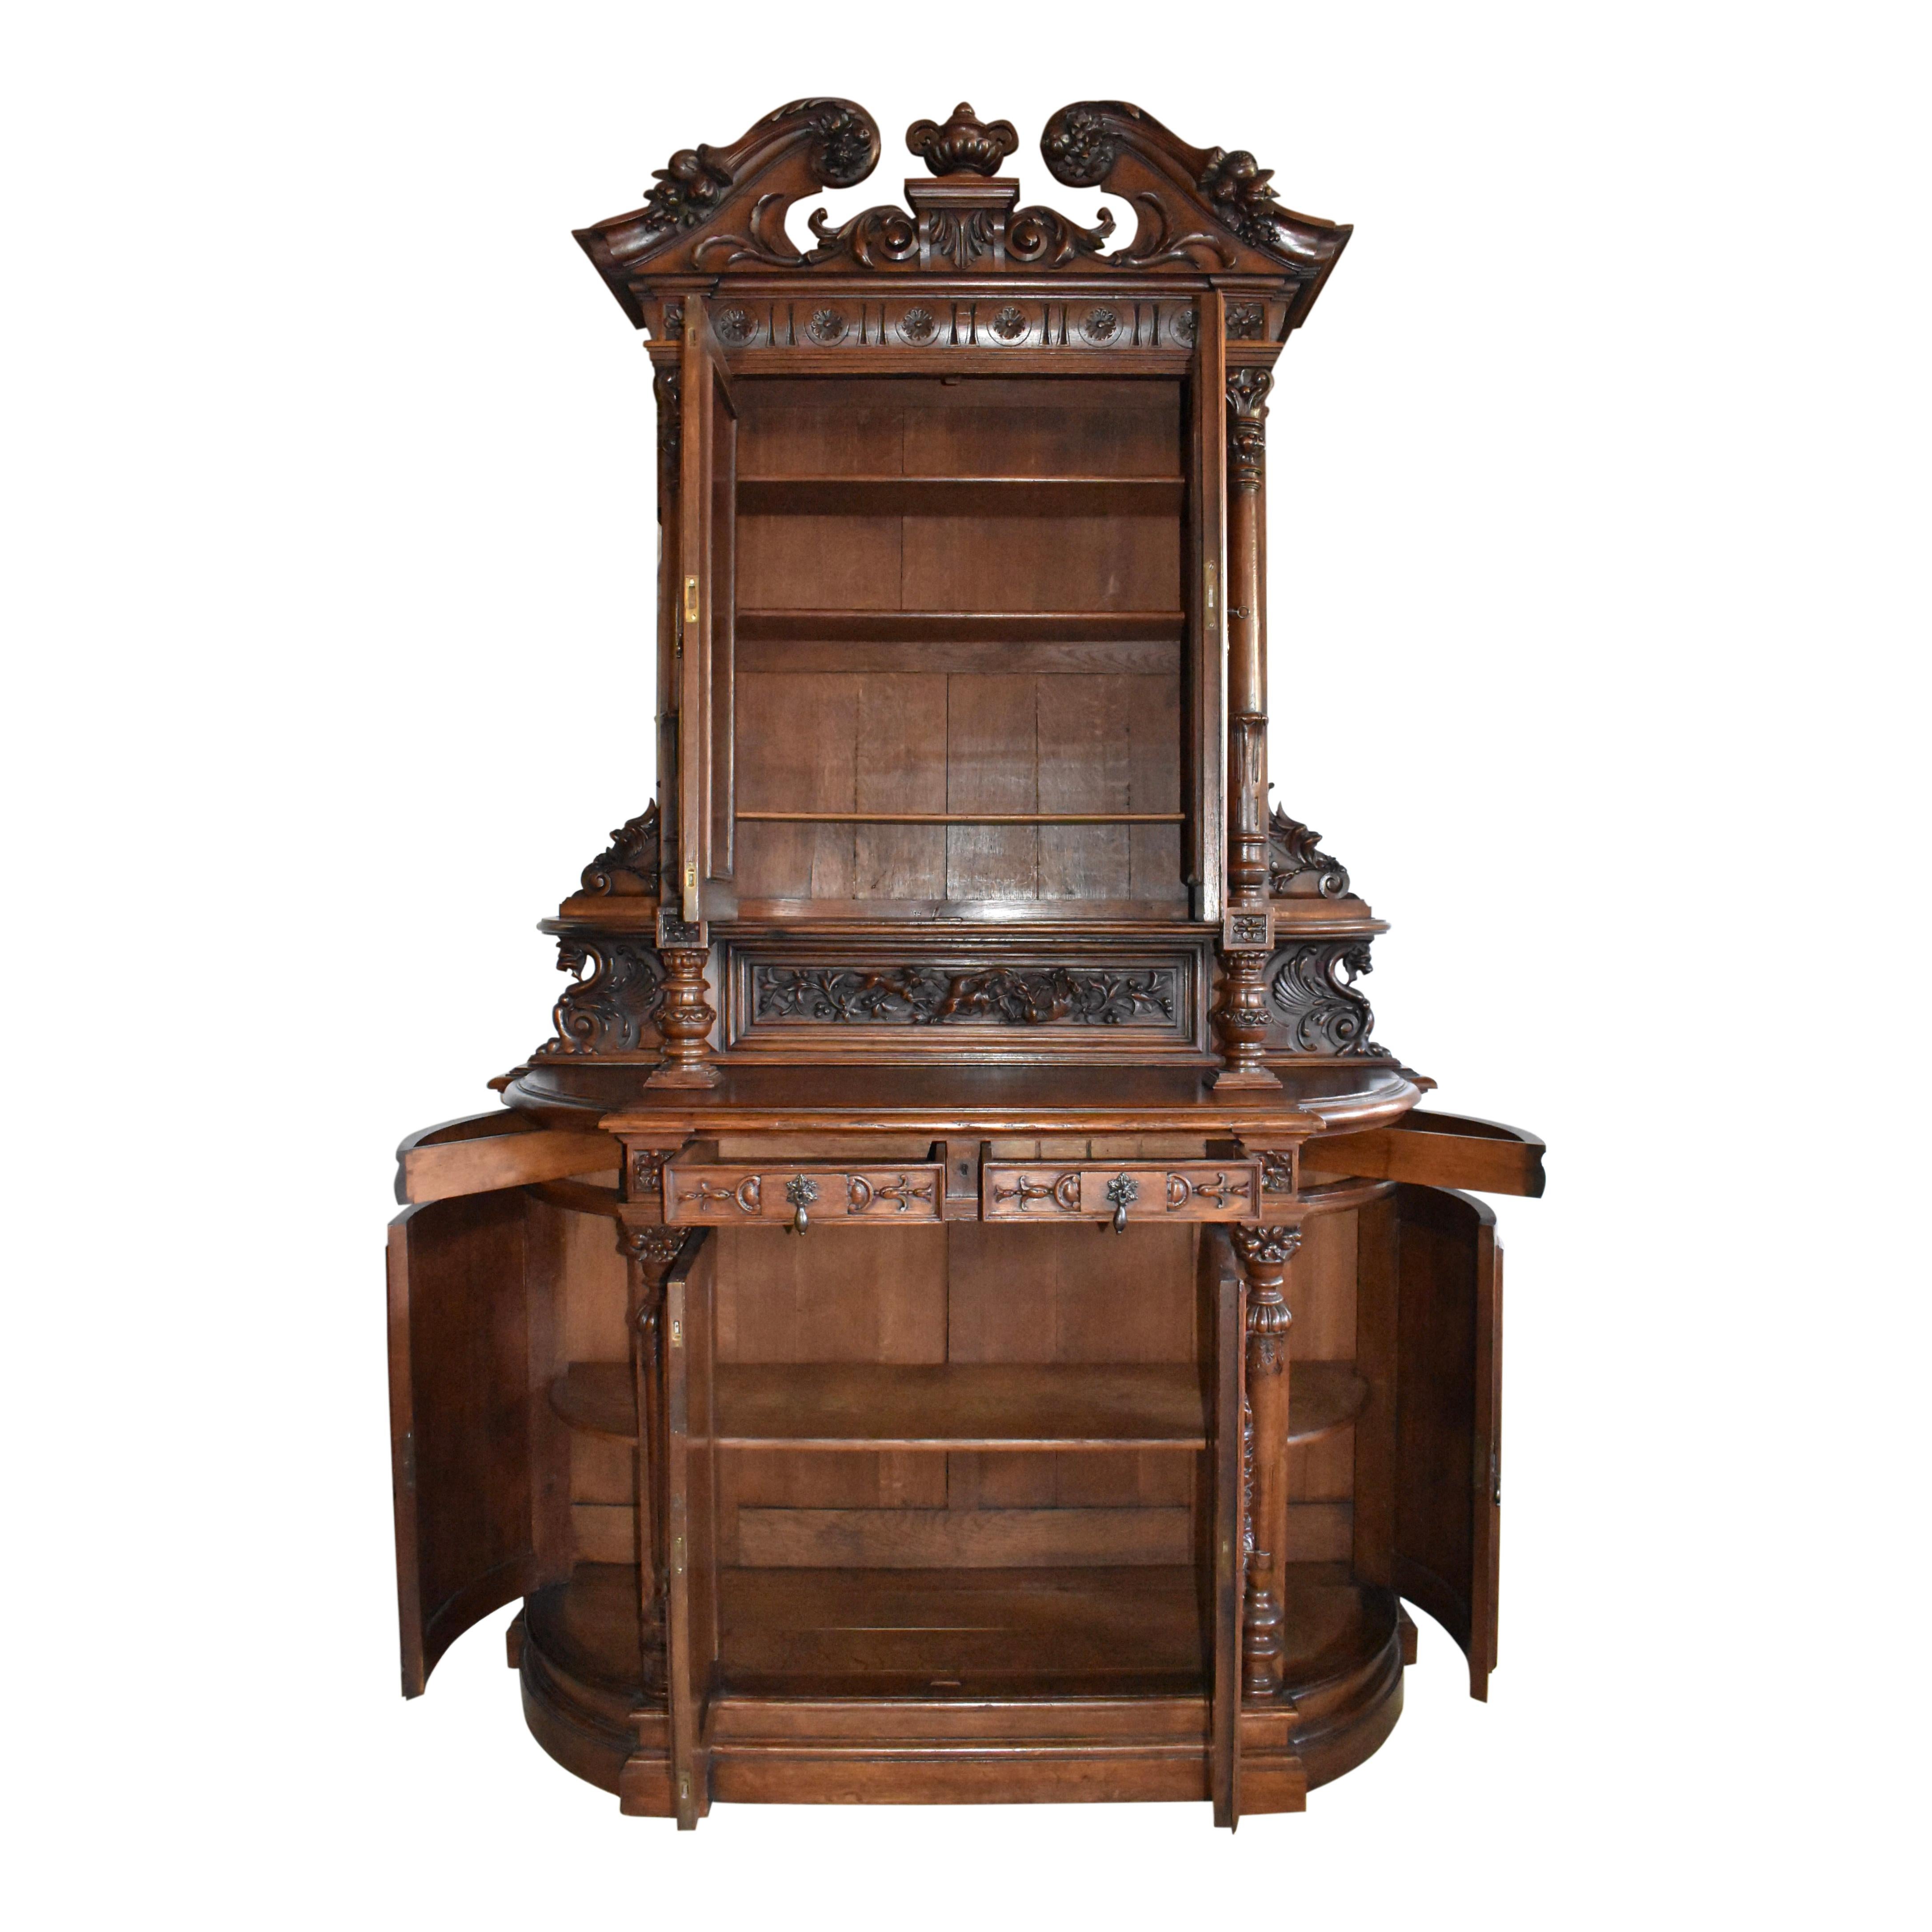 Fine craftsmanship and lavish carvings abound in this handsome Renaissance Revival Hunt cabinet, which was created in France in the late-19th century from European oak. The cabinet is two pieces with the top raised on carved pillars and a carved